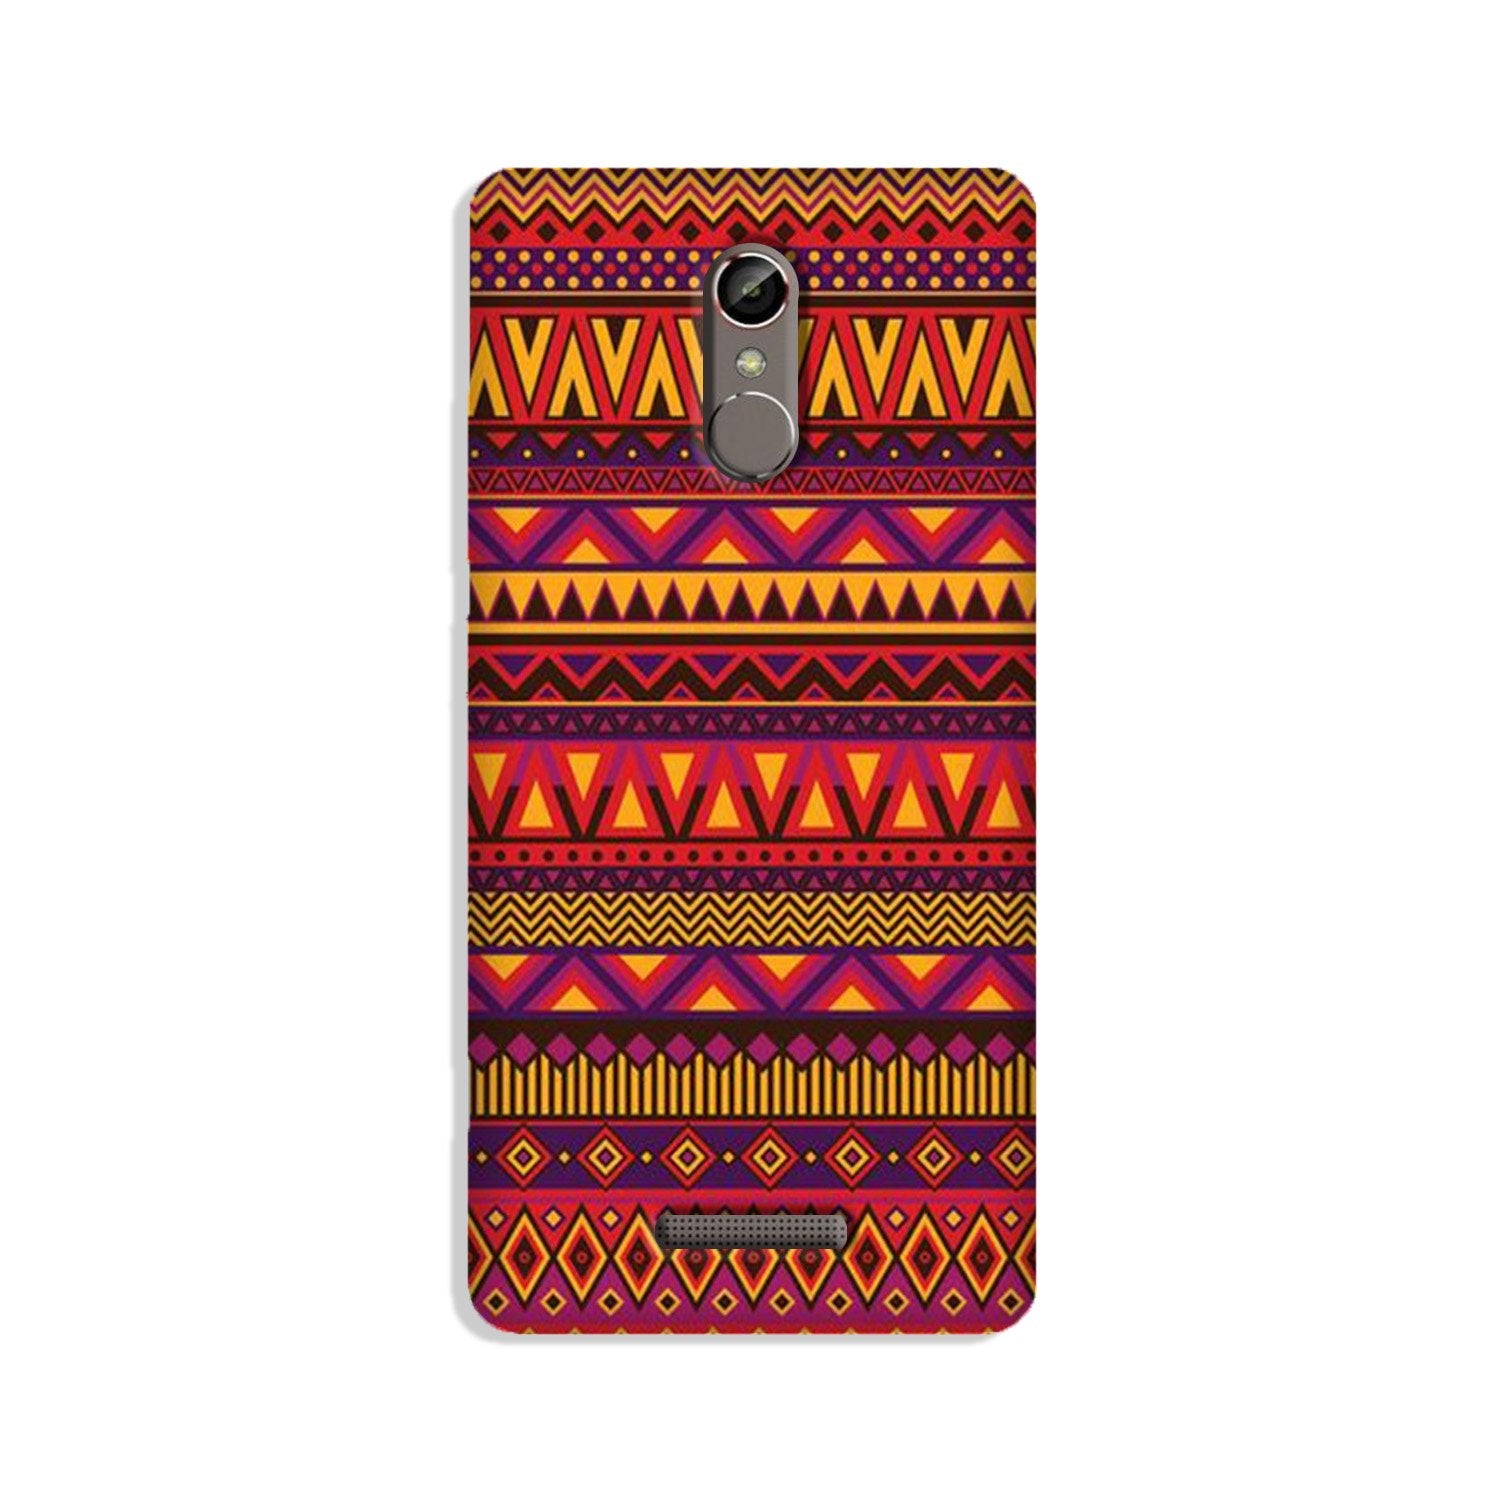 Zigzag line pattern2 Case for Gionee S6s